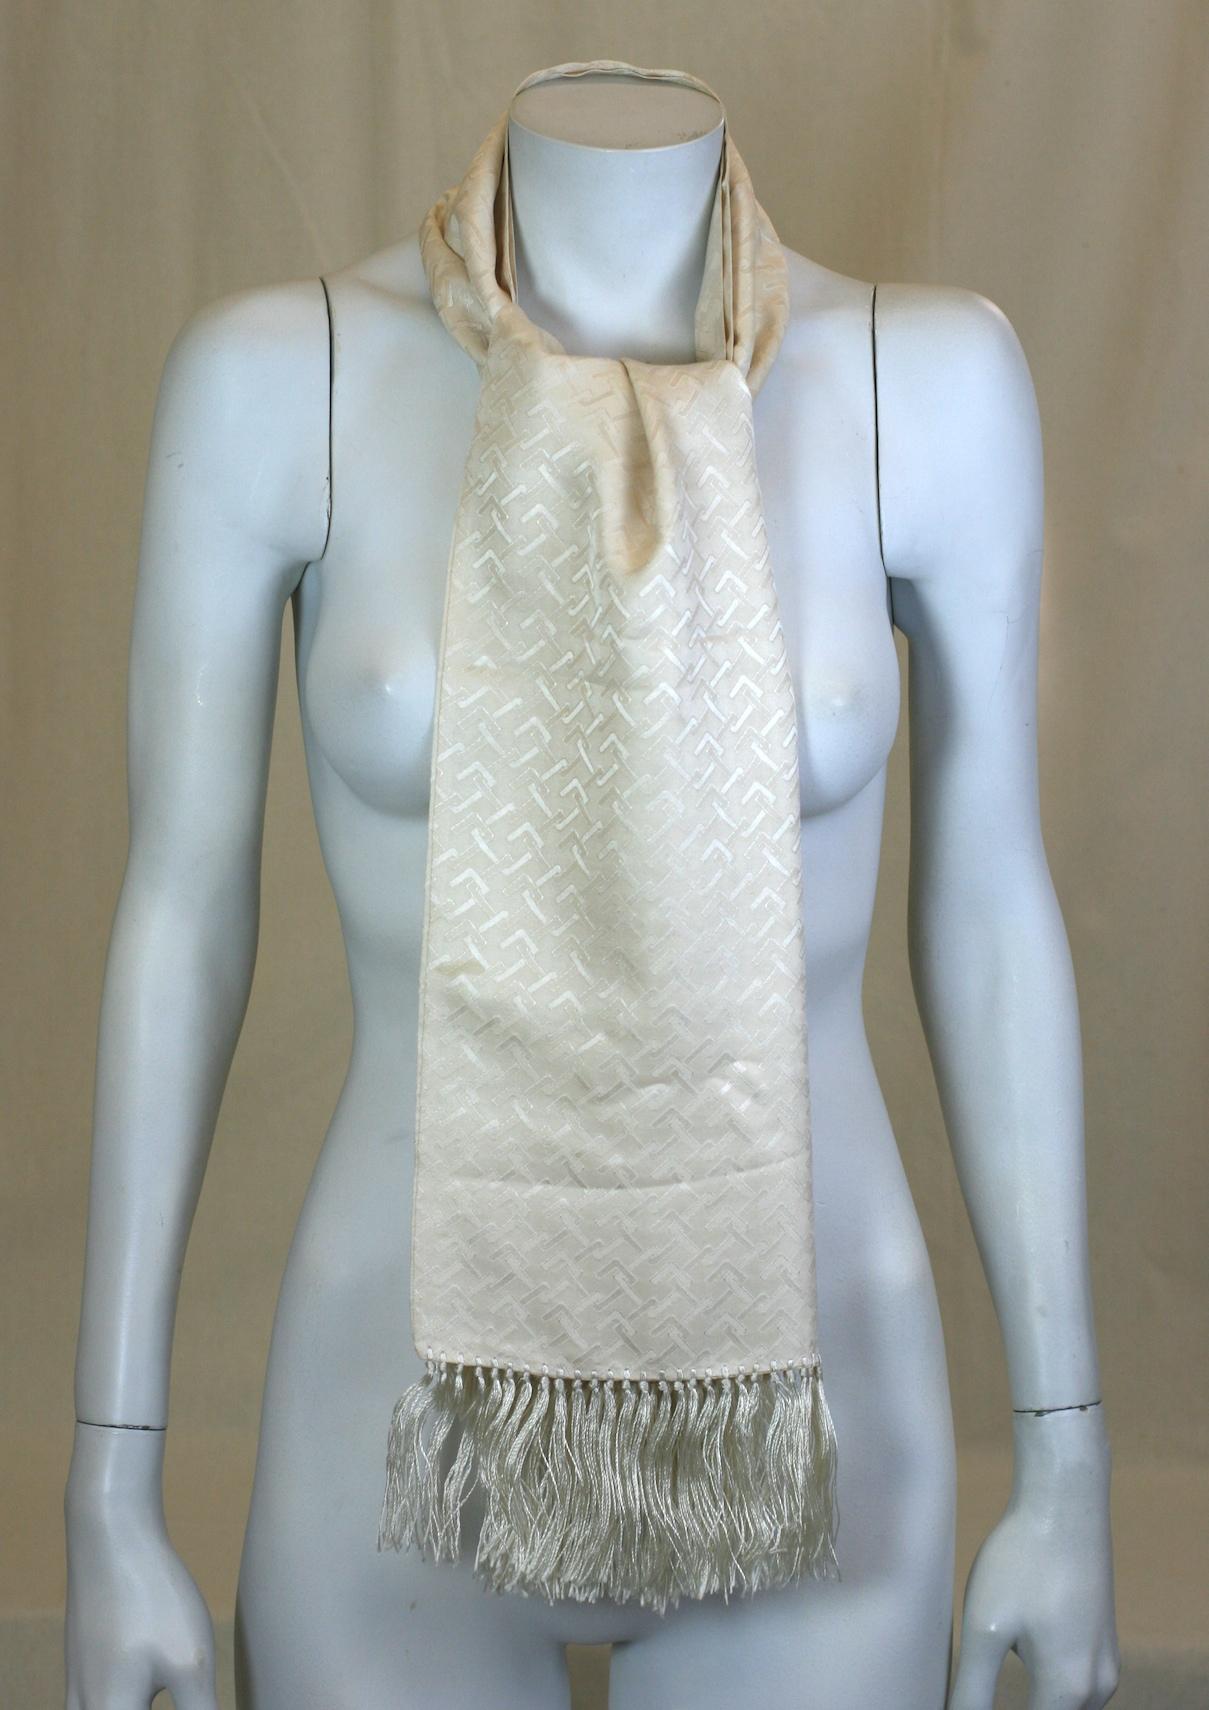 Elegant unisex Gucci Ivory Silk Jacquard Logo Scarf from the 1970's. Amazing Gucci's 70's Jet Set vibe with hand made silk fringe. Tuxedo ready.
Conjoined 